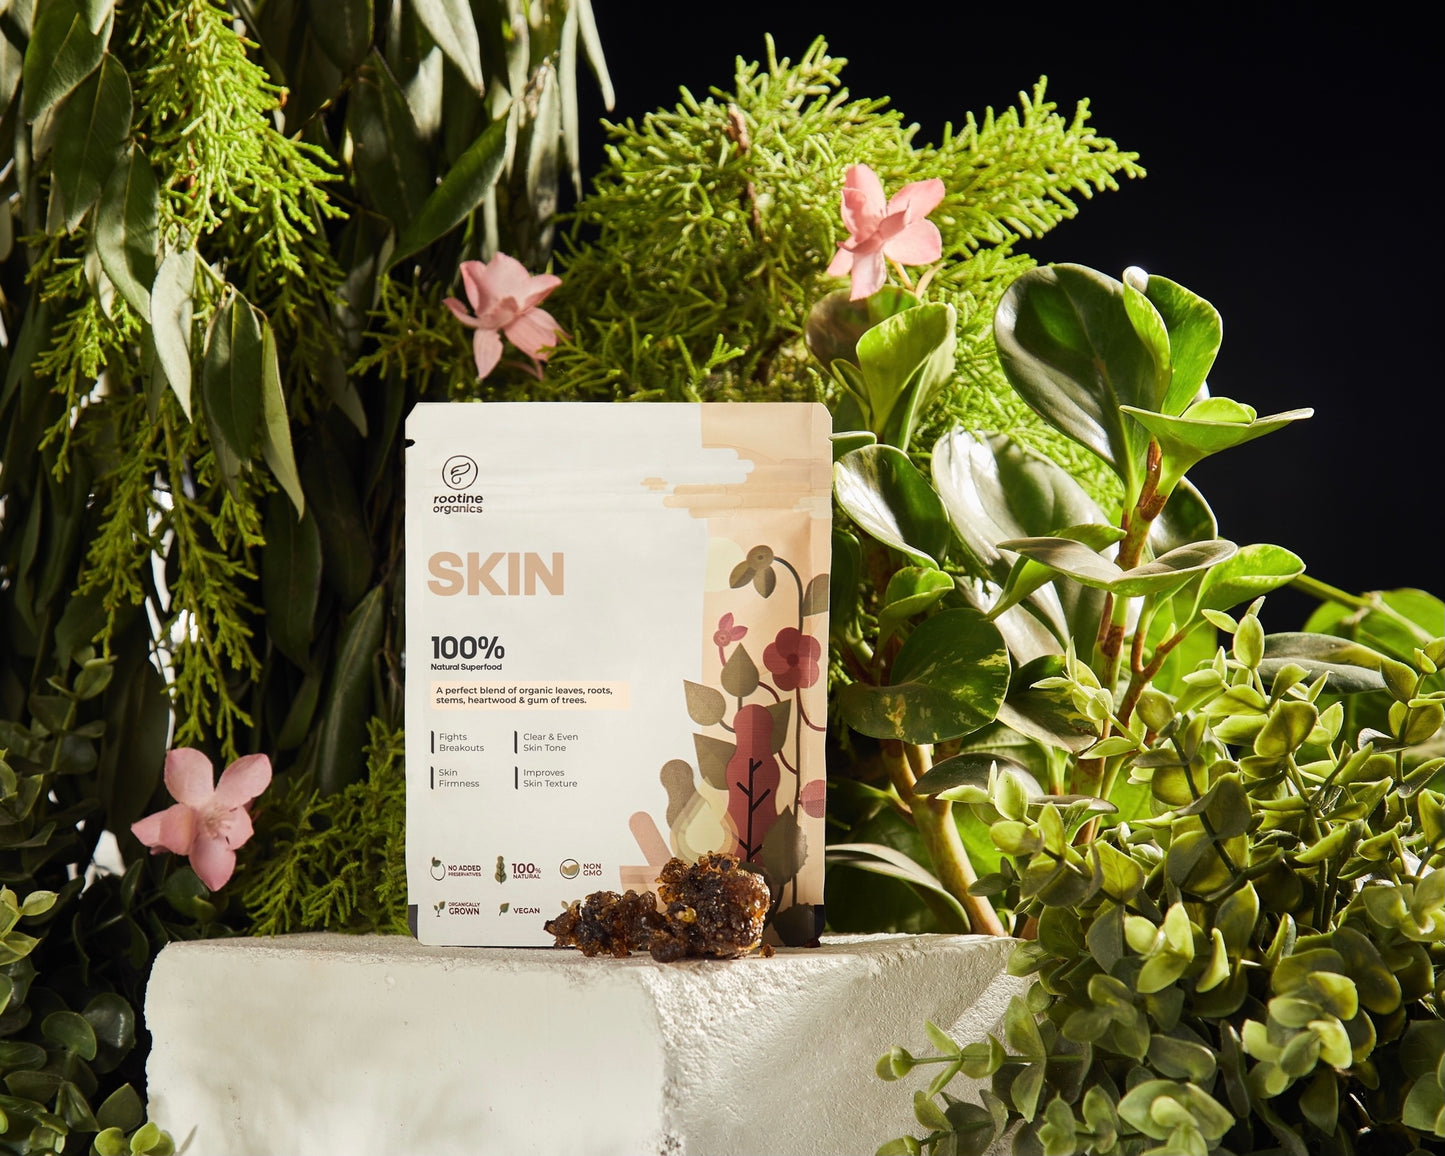 SKIN : Your Superfood for Healthy, Glowing Skin